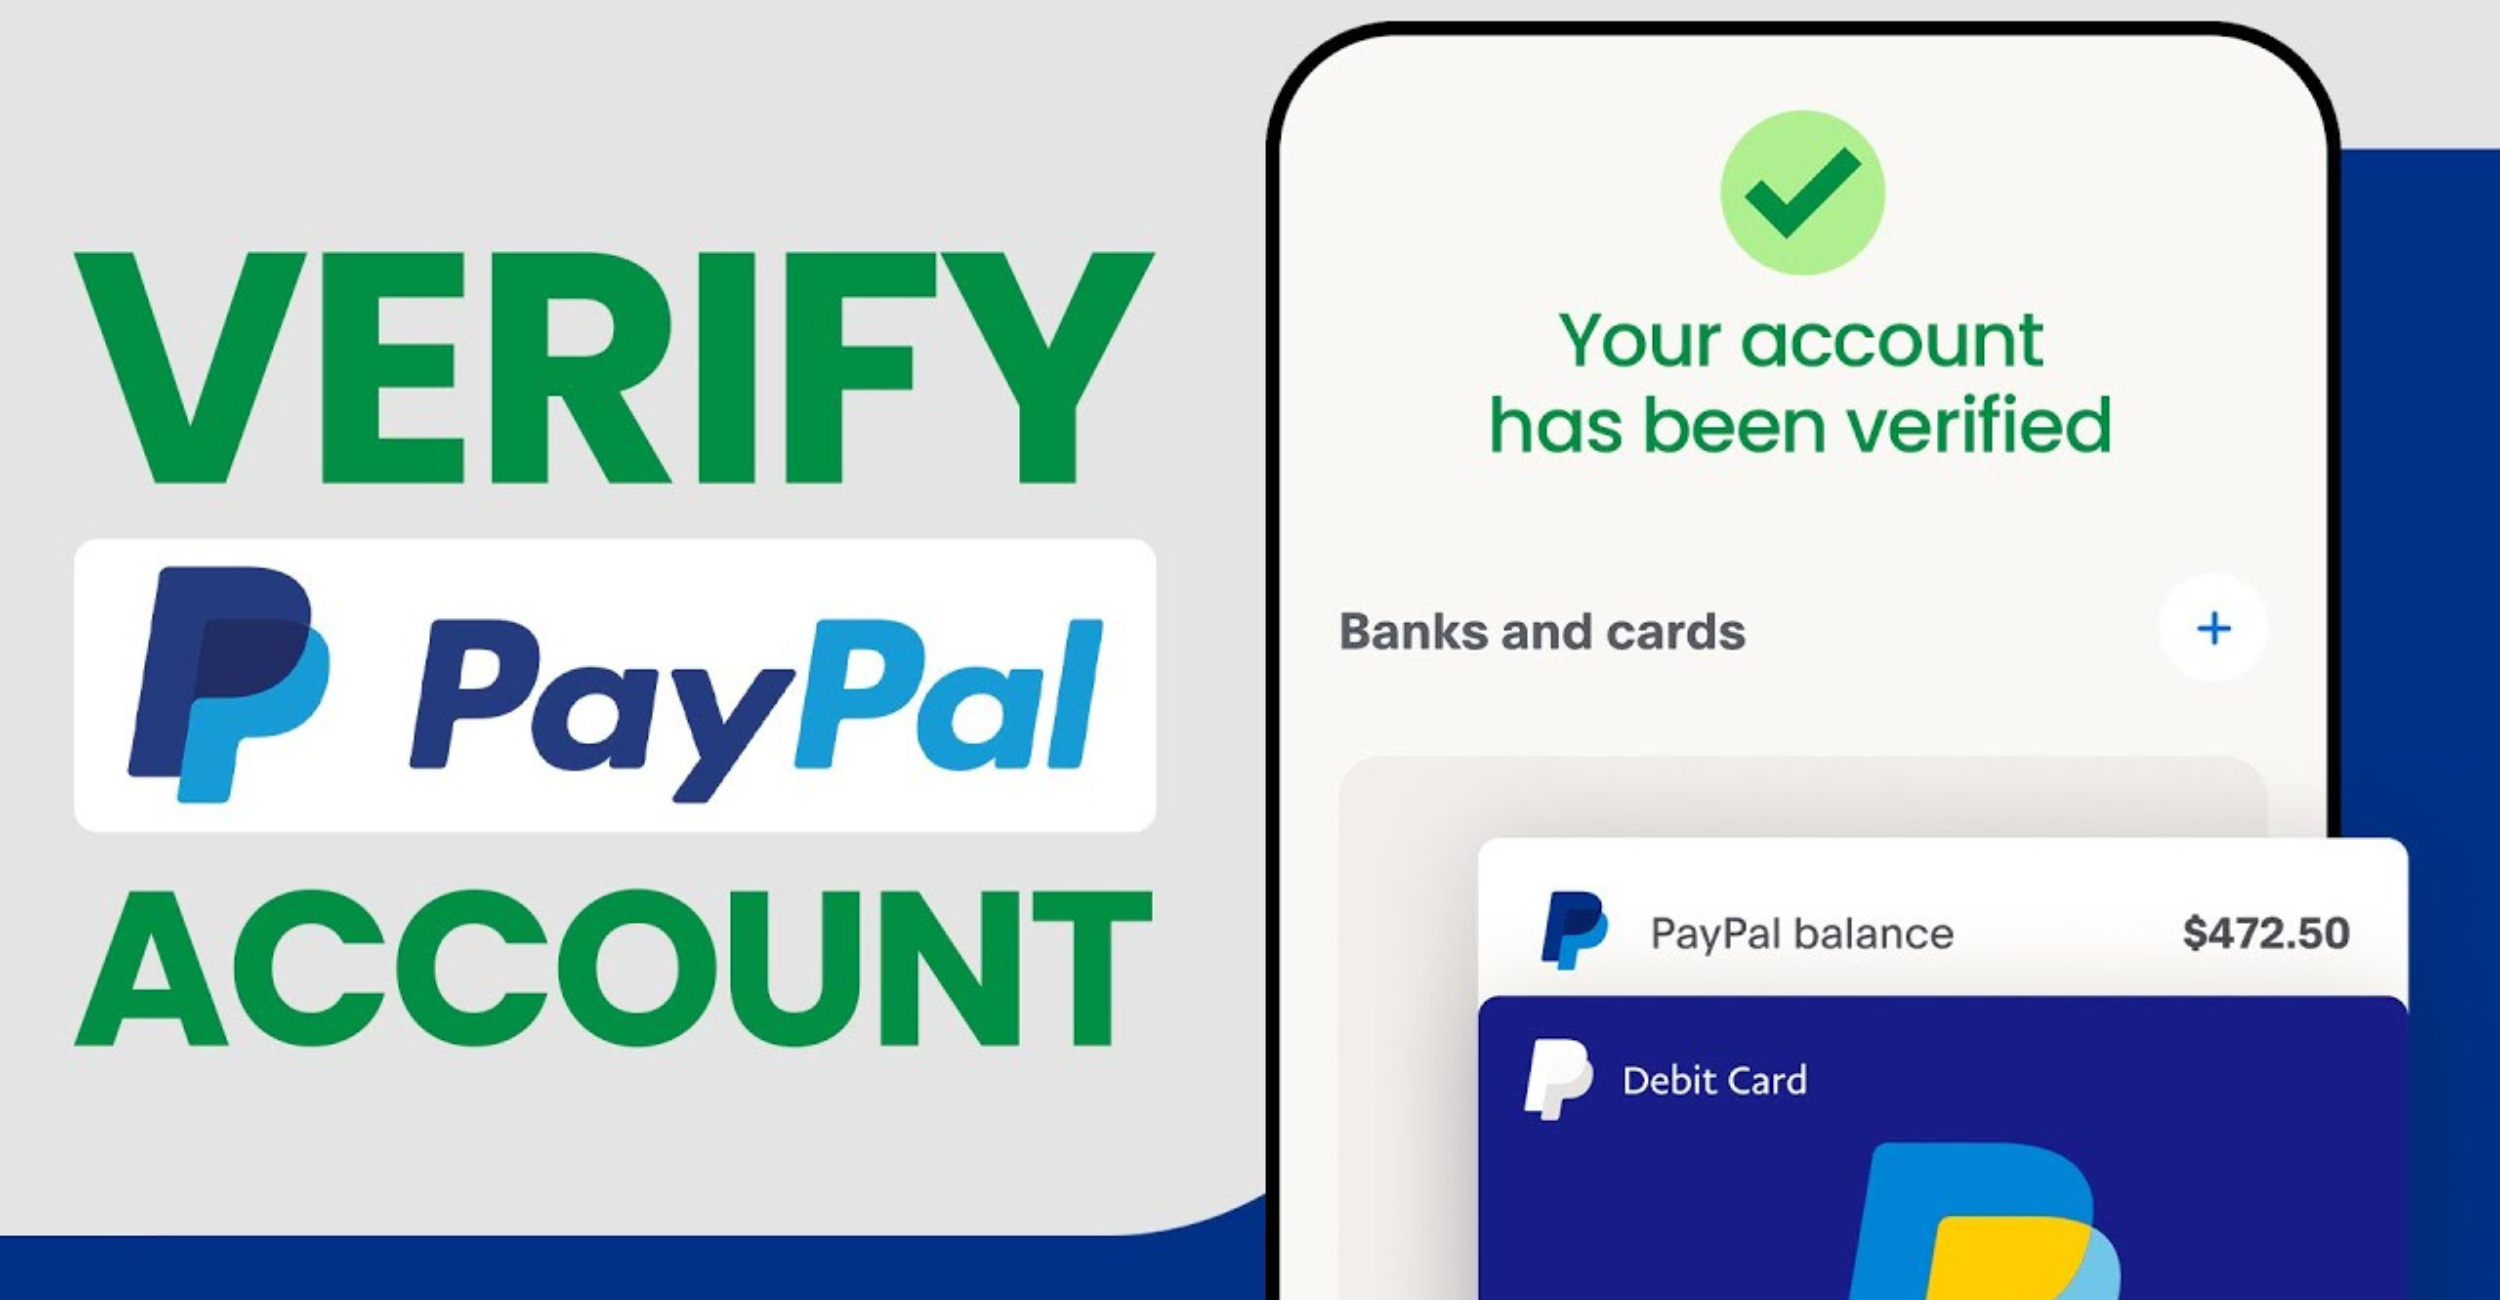 Buy Verified PayPal Account
